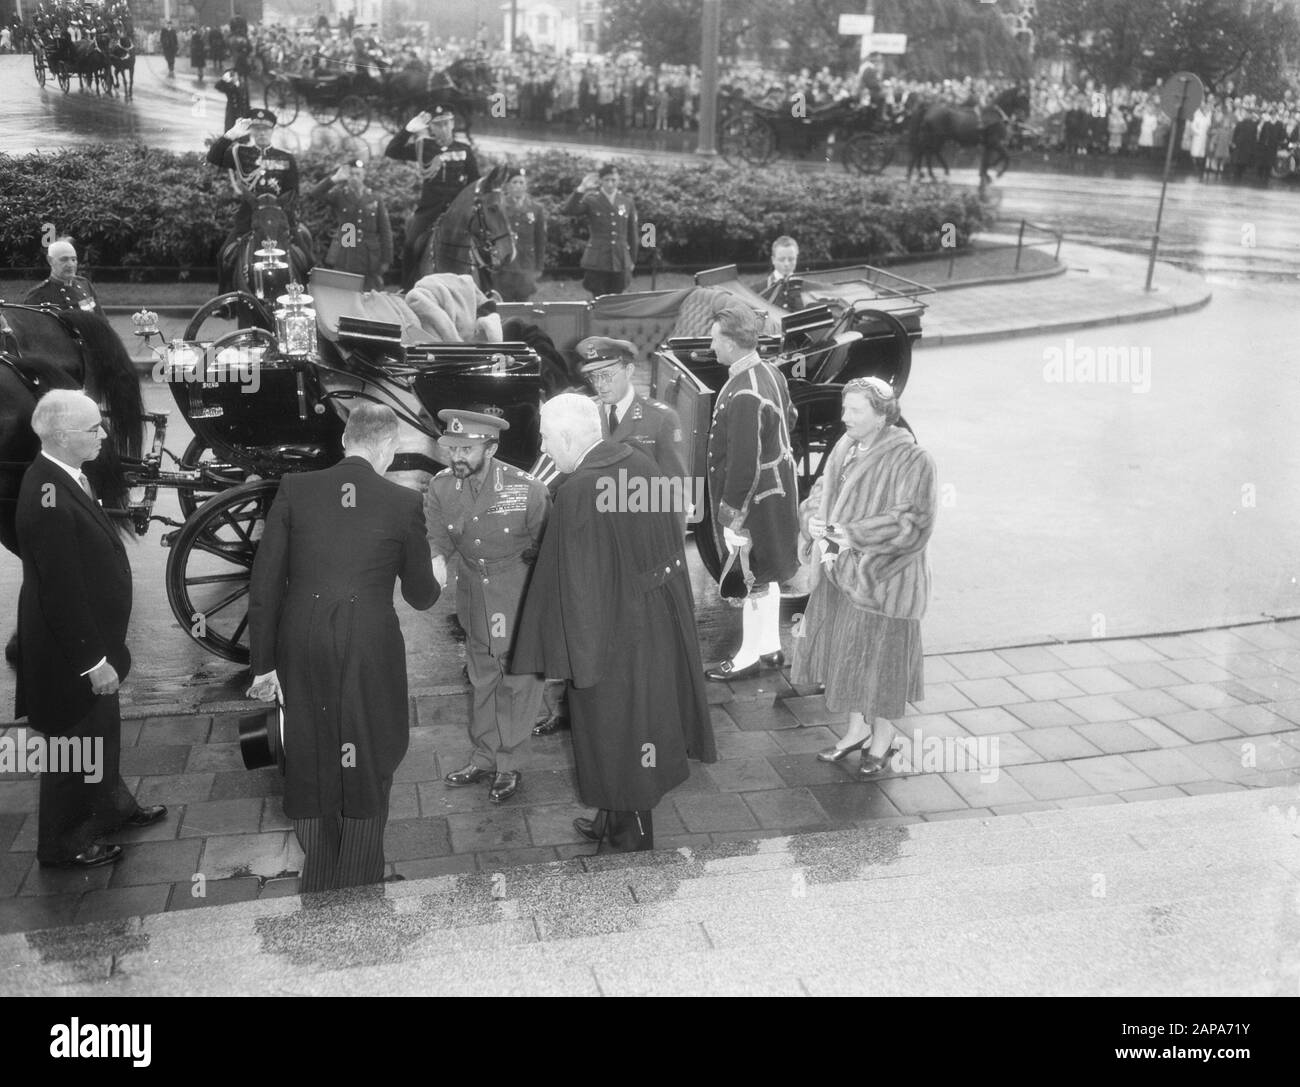 Visit Emperor Haile Selassie of Ethiopia to our country Visit Institute of the Tropics Date: November 3, 1954 Keywords: visits, emperors Personal name: Institute for the Tropics Stock Photo